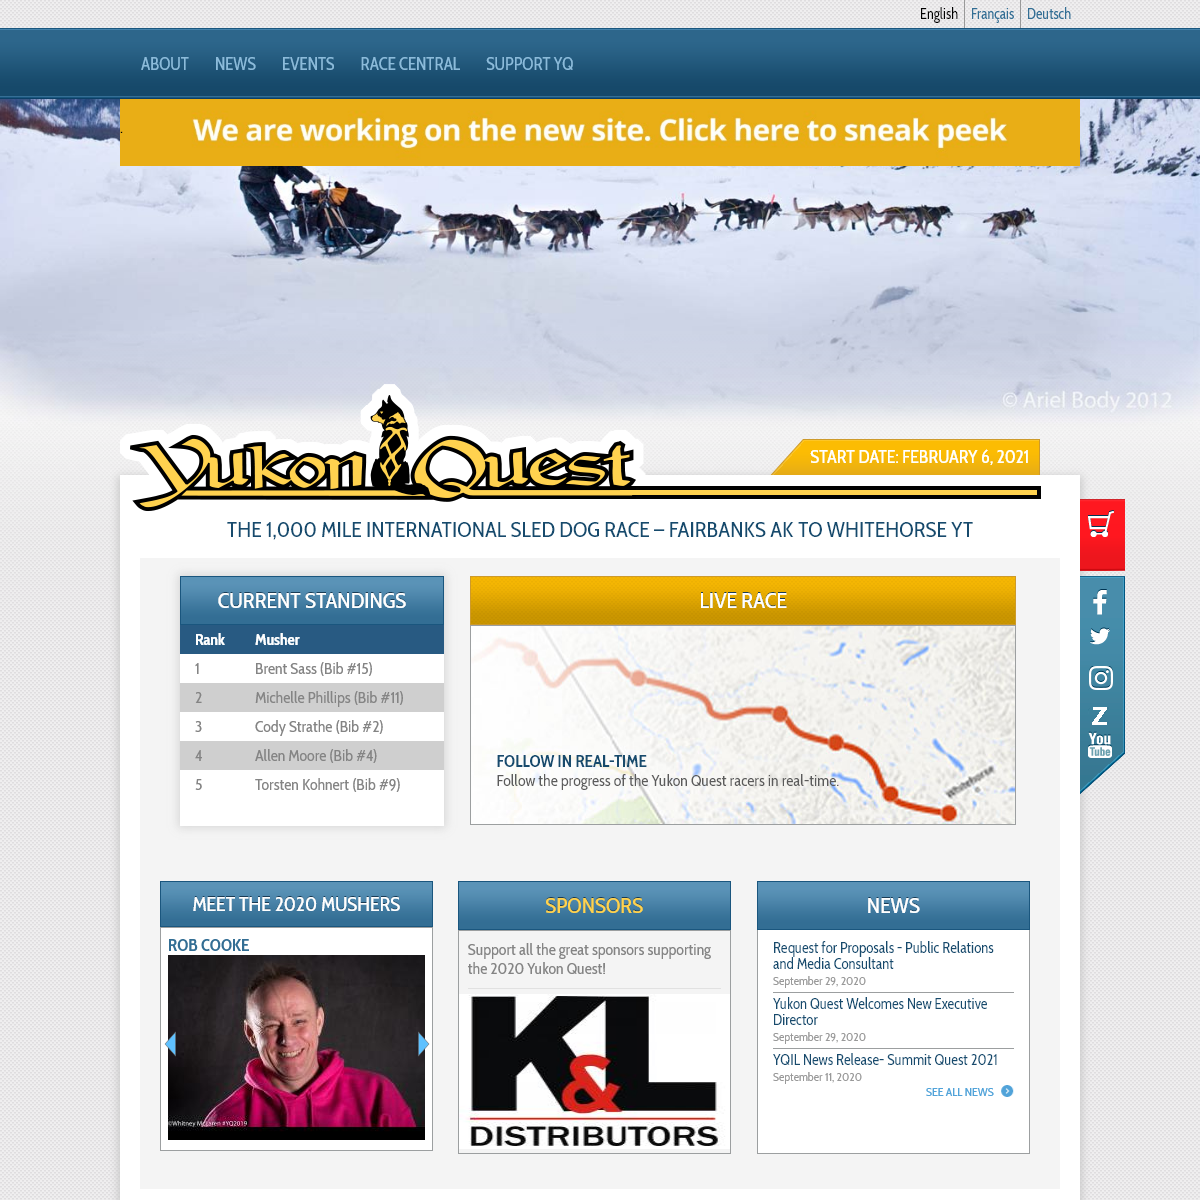 A complete backup of yukonquest.com